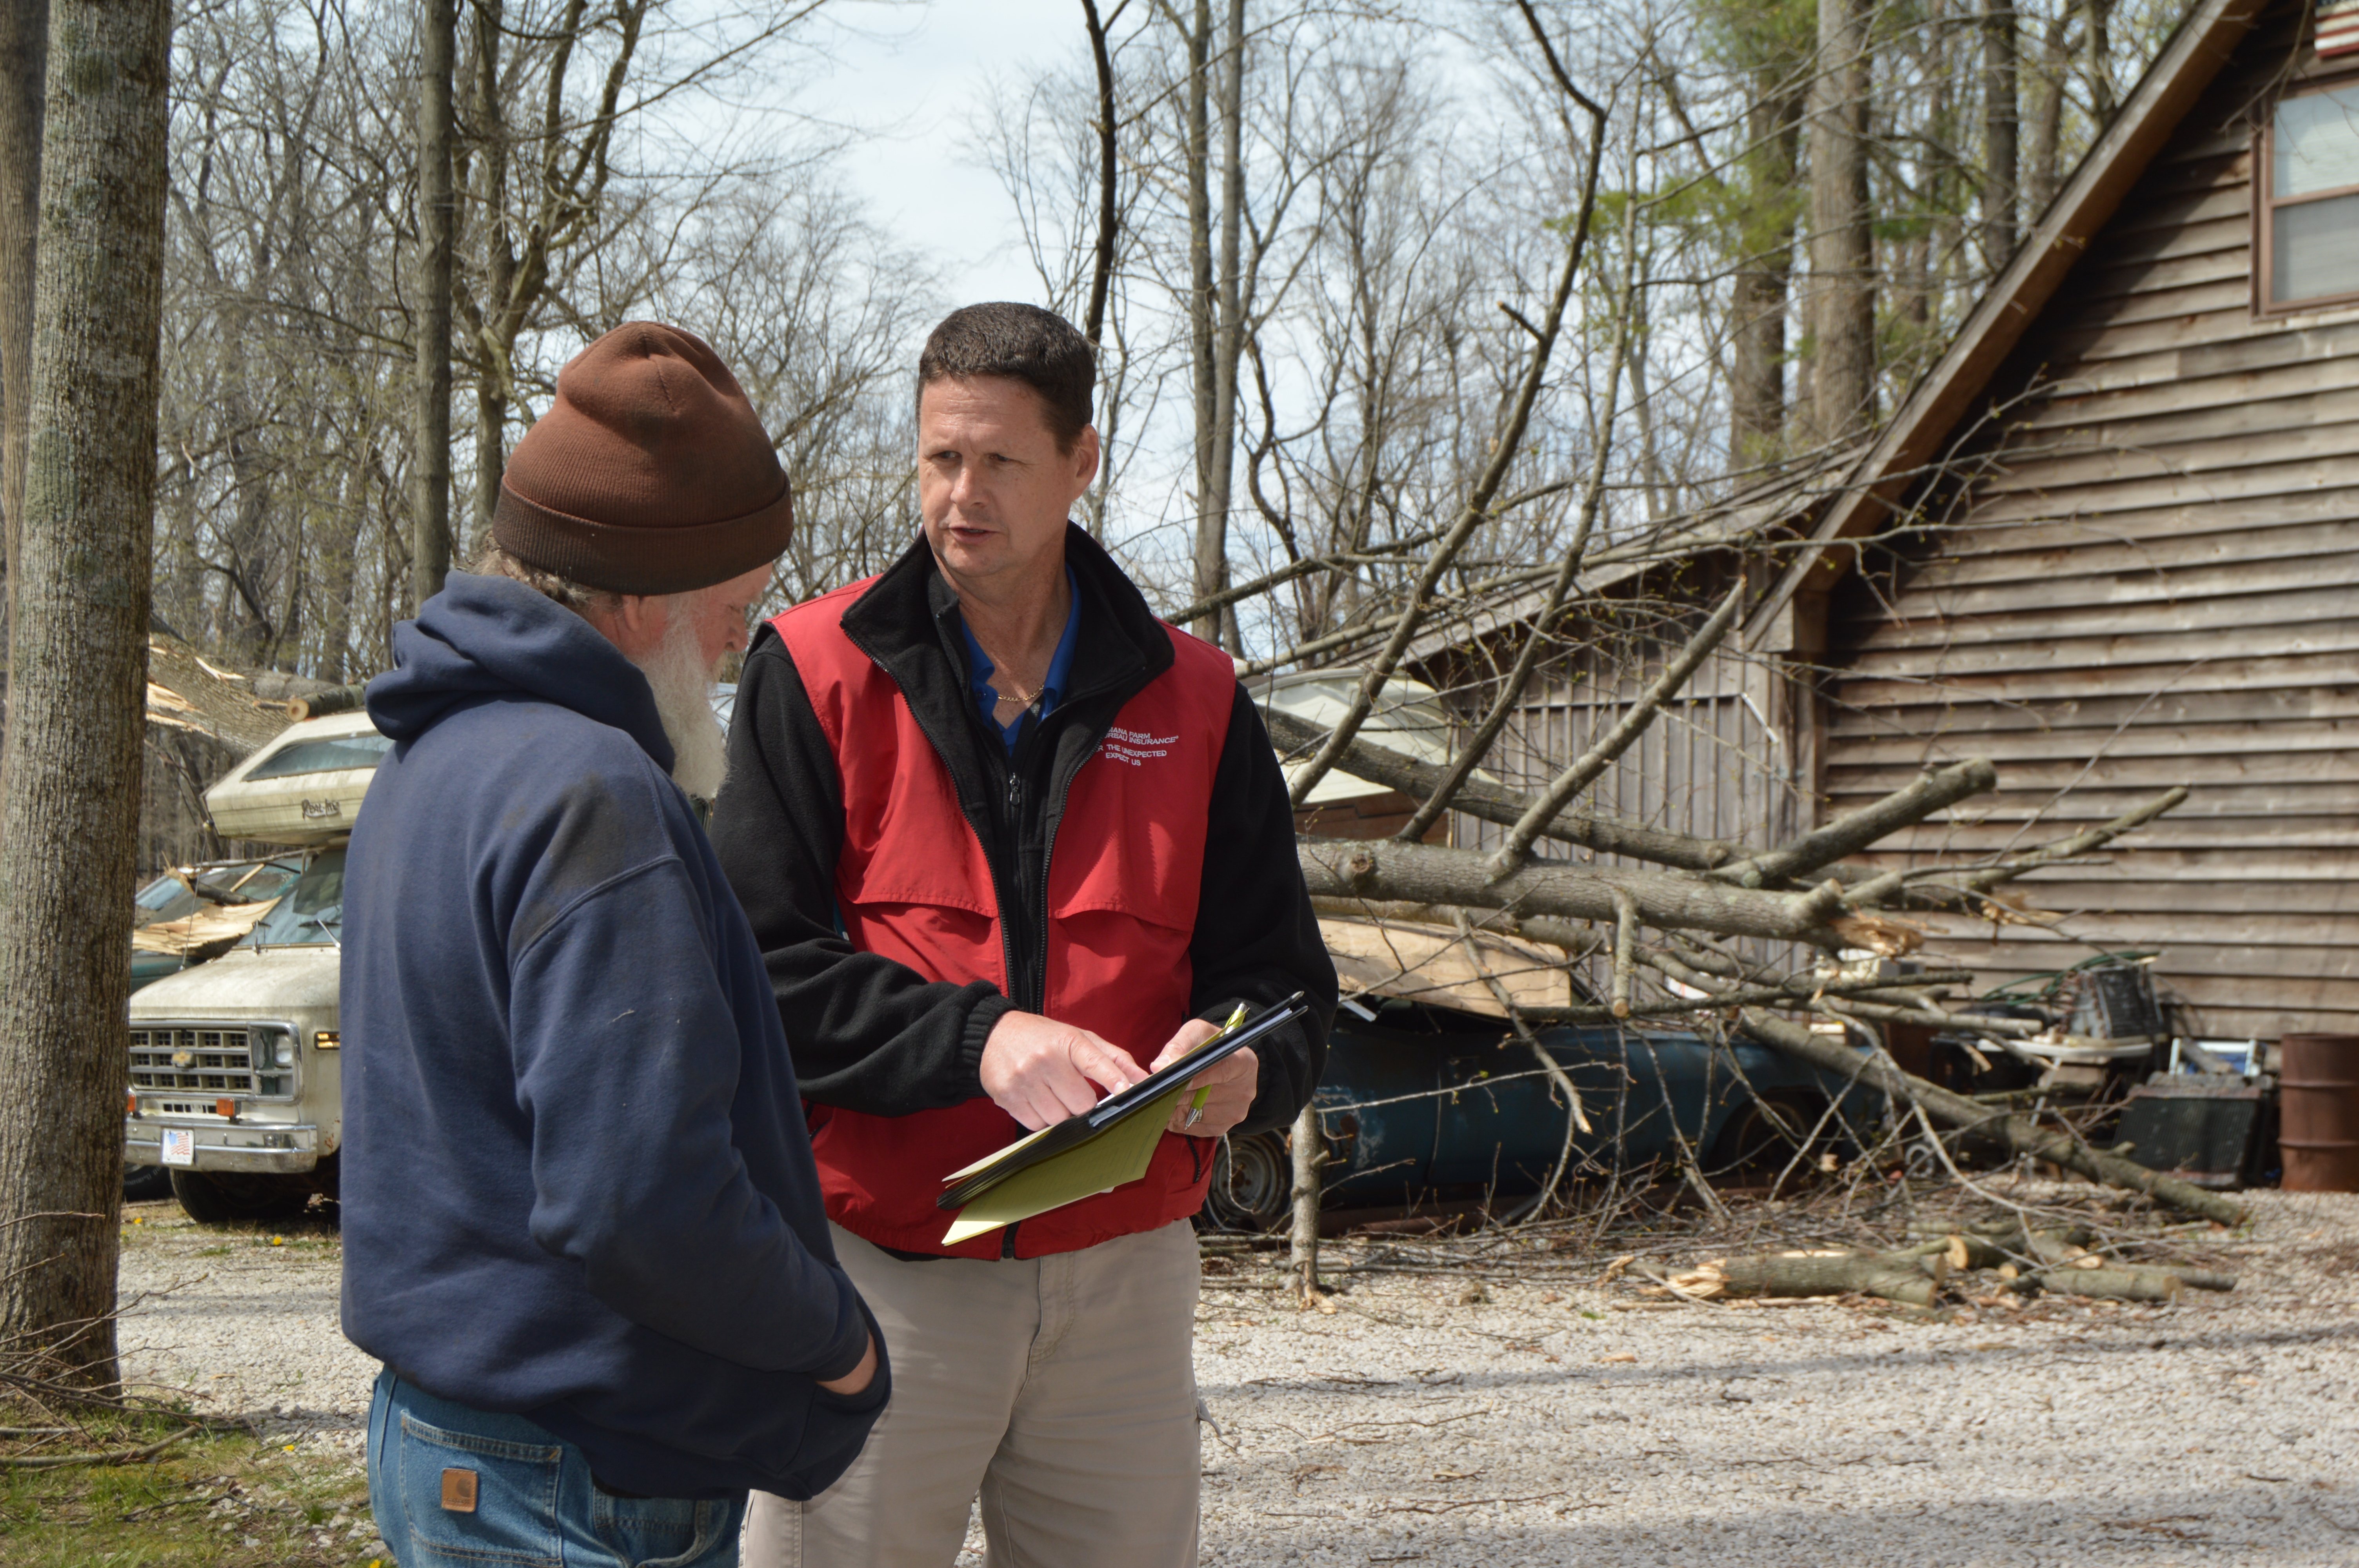 An Indiana Farm Bureau Insurance claims representative talks with a client. In the background a tree is lying on a crushed car.